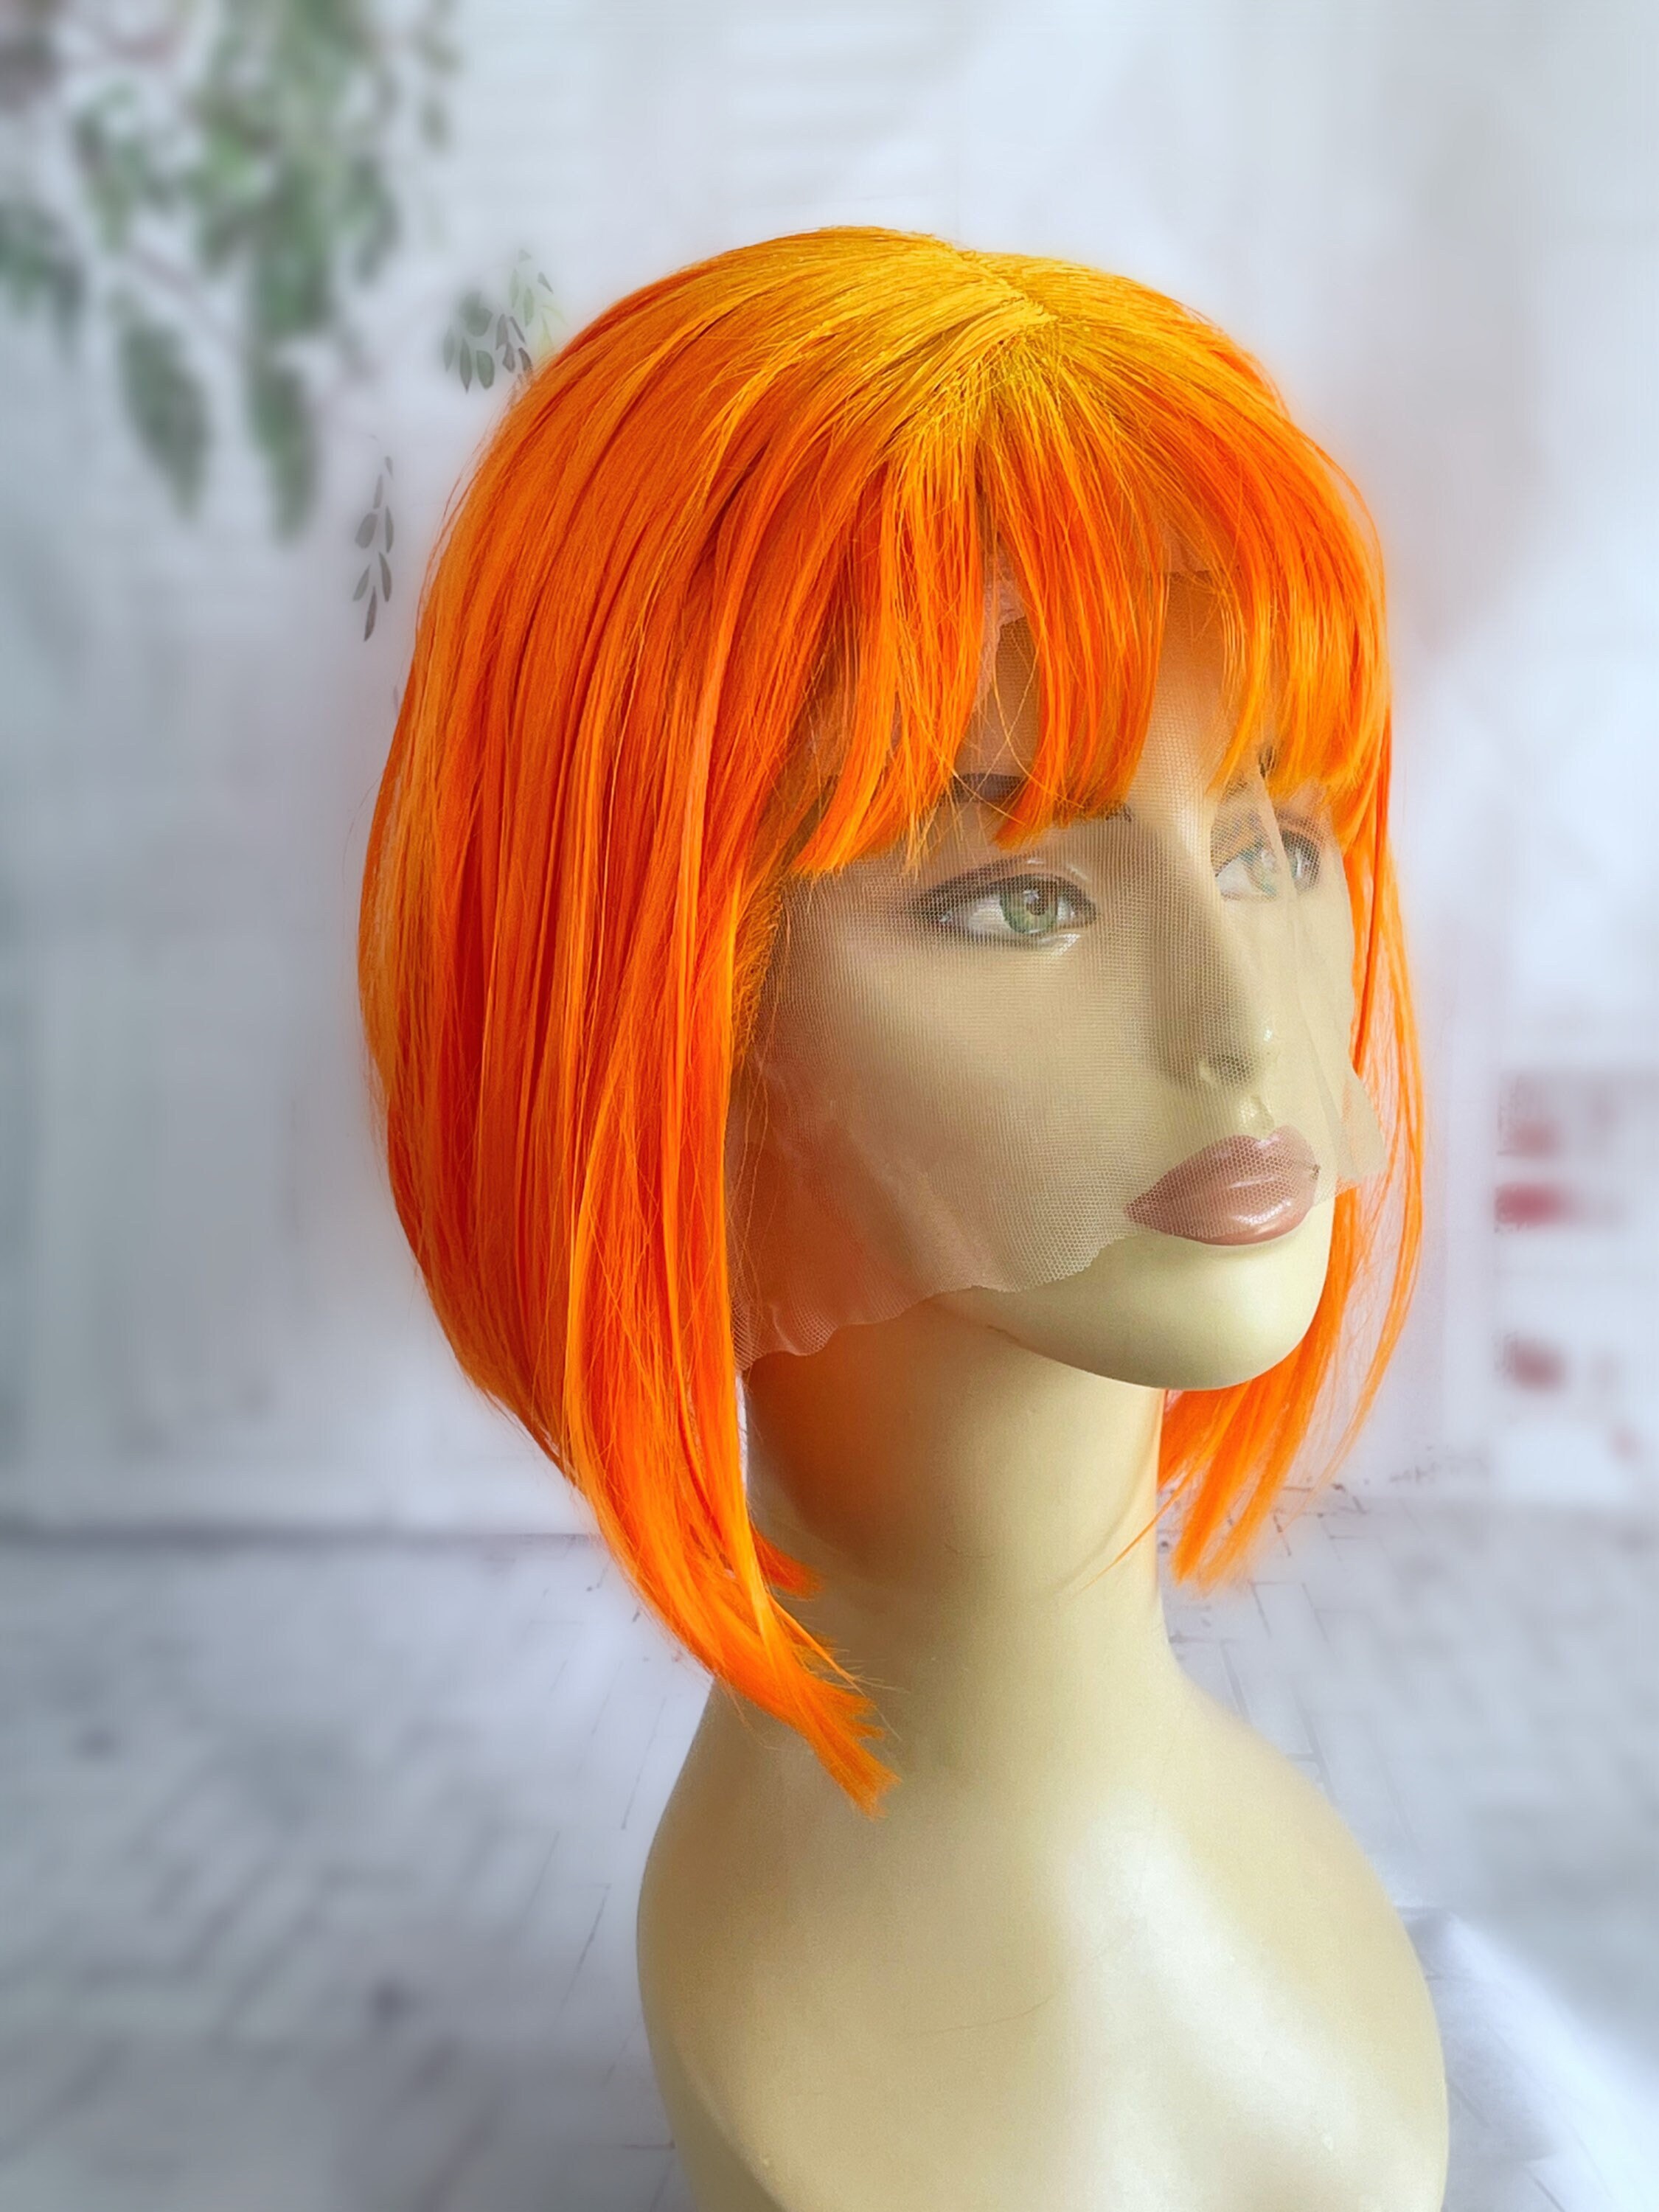 Red Long Wig For Sex Doll - Coeros